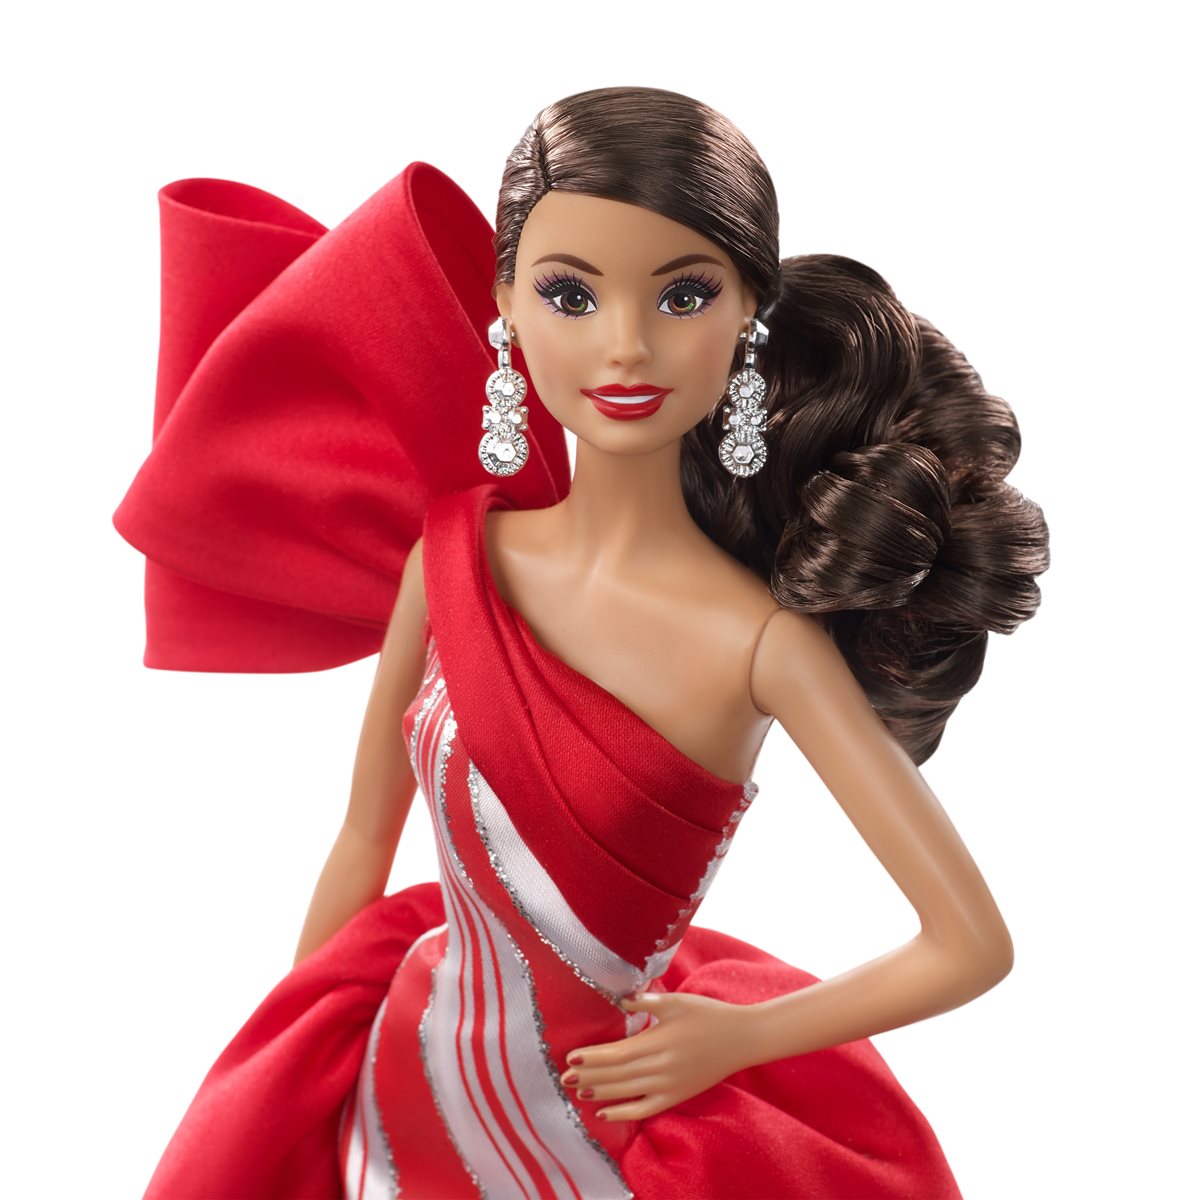 2019 holiday barbie release date